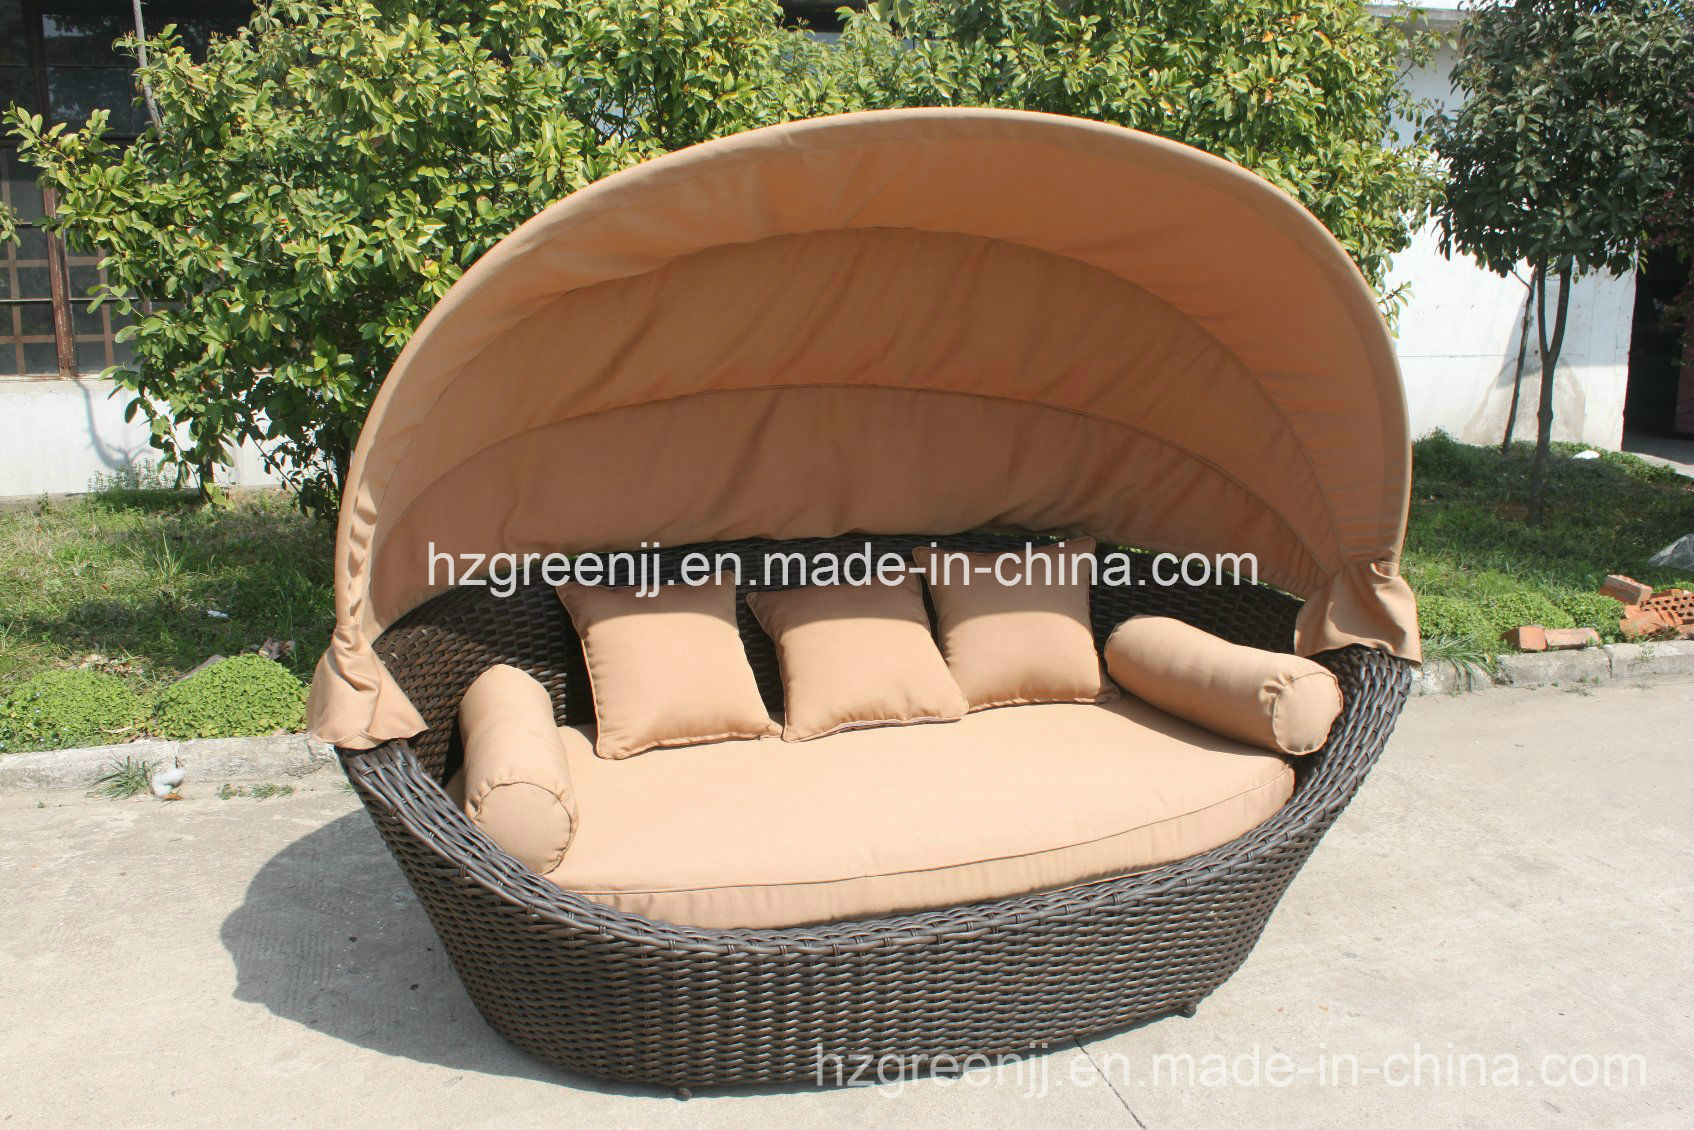 Round Rattan Daybed Beach Bed Sunbed Outdoor Furniture